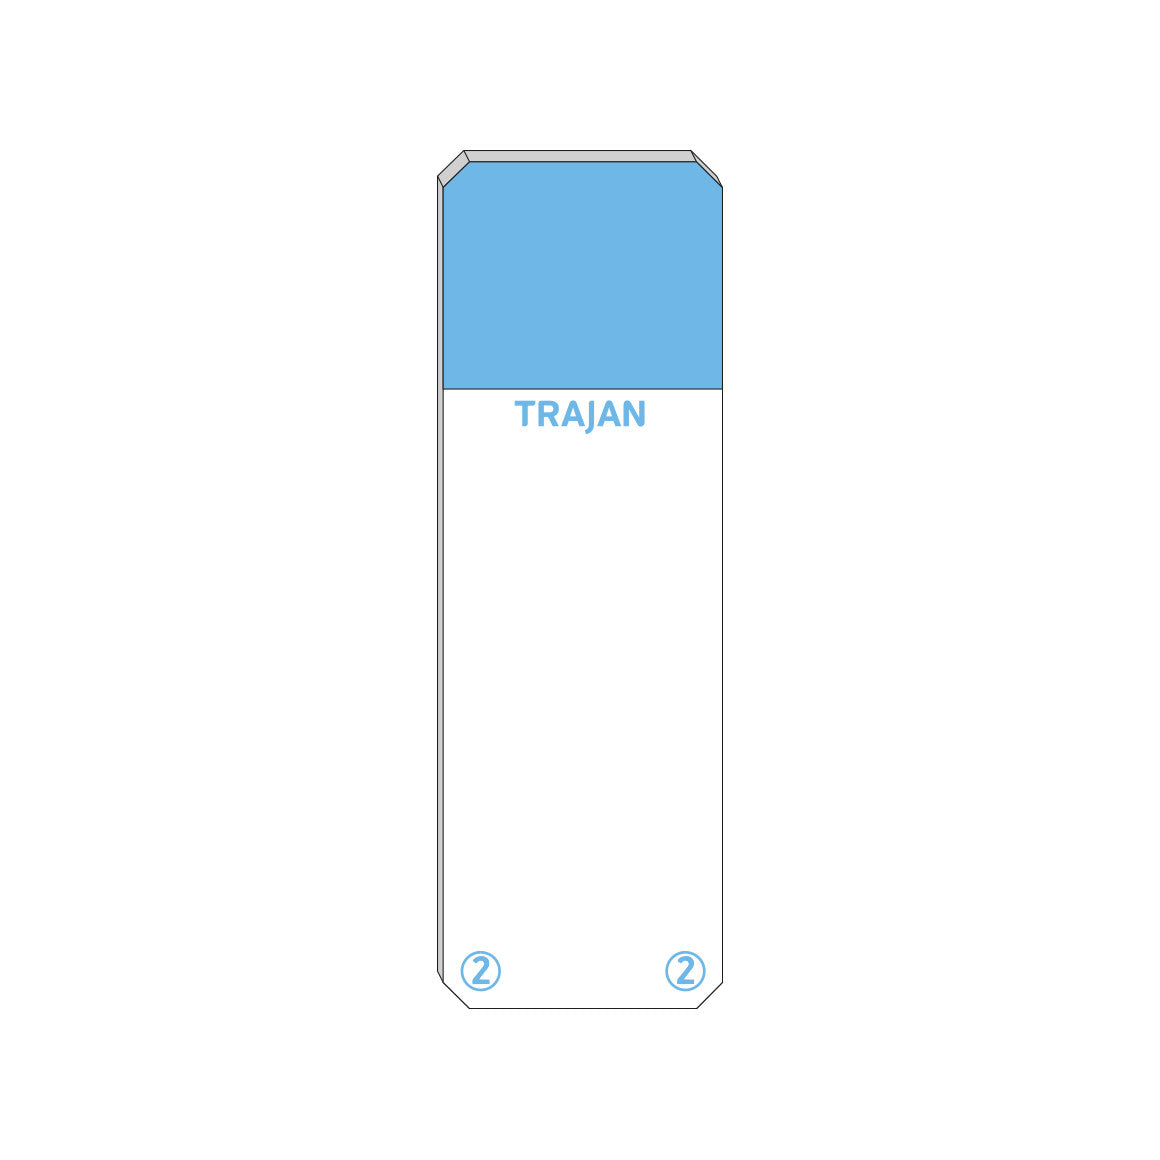 Trajan Scientific and Medical, Series 2 Adhesive Microscope Slides, Blue, Frost 20 mm, 76 mm x 26 mm